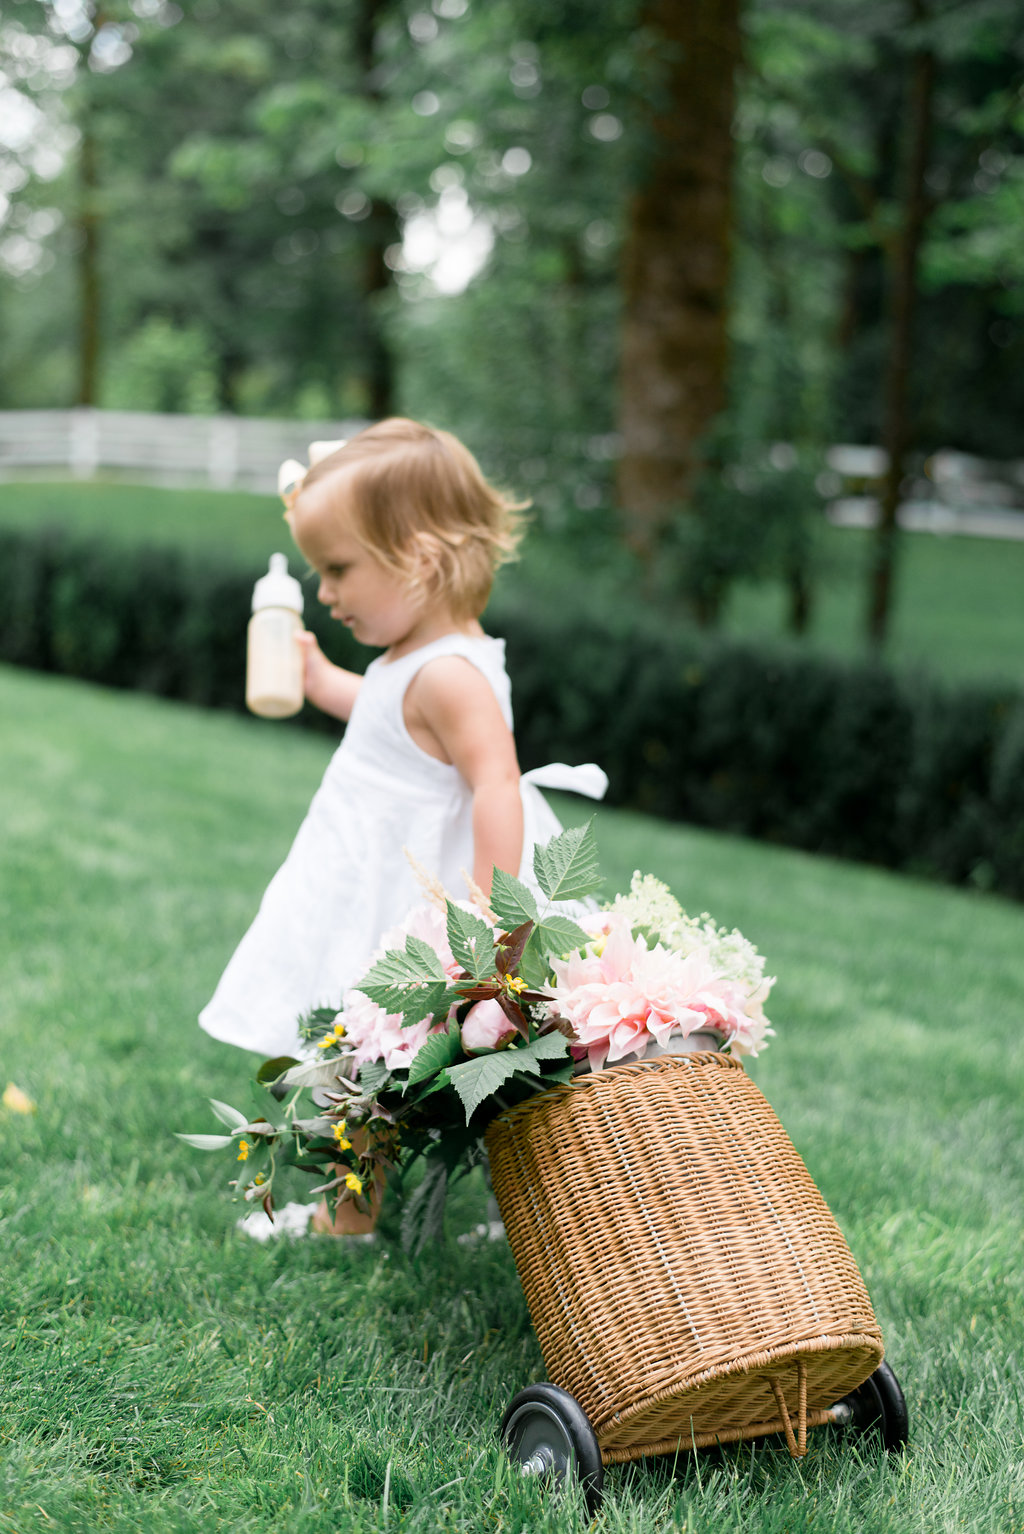 Lillya pulling a woven basket with fresh flowers 